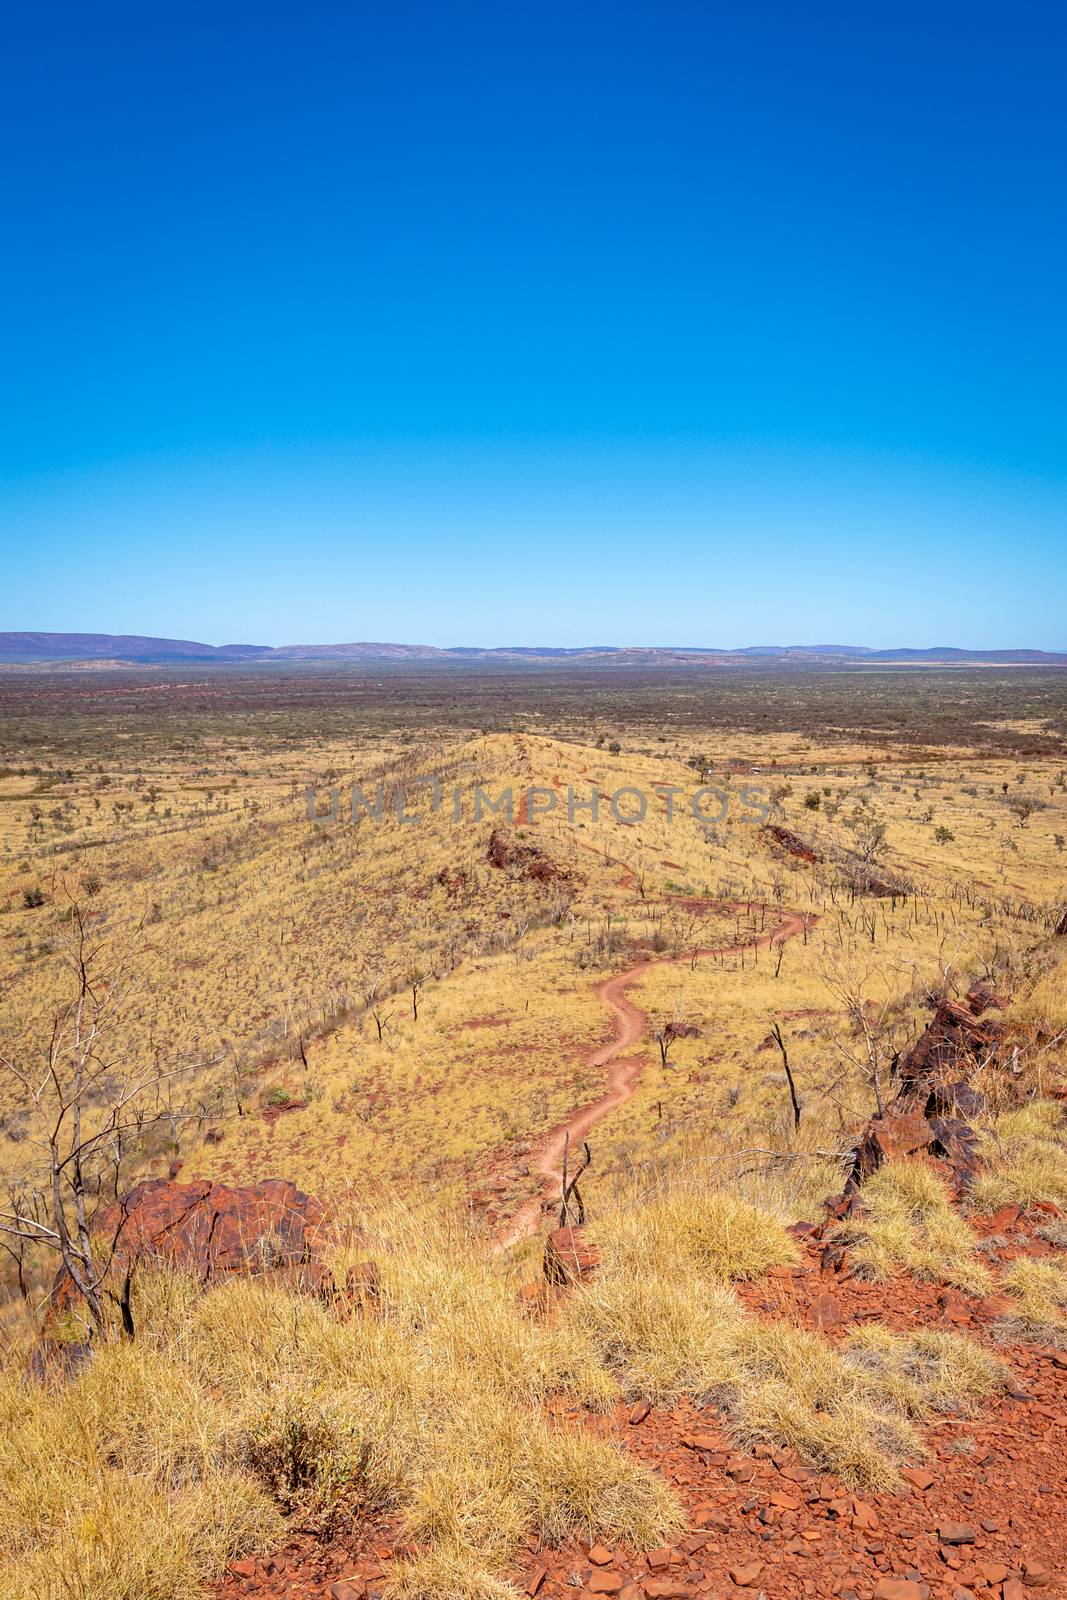 Mount Bruce view downwards the hiking path leading to mountain top at Karijini National Park Australia